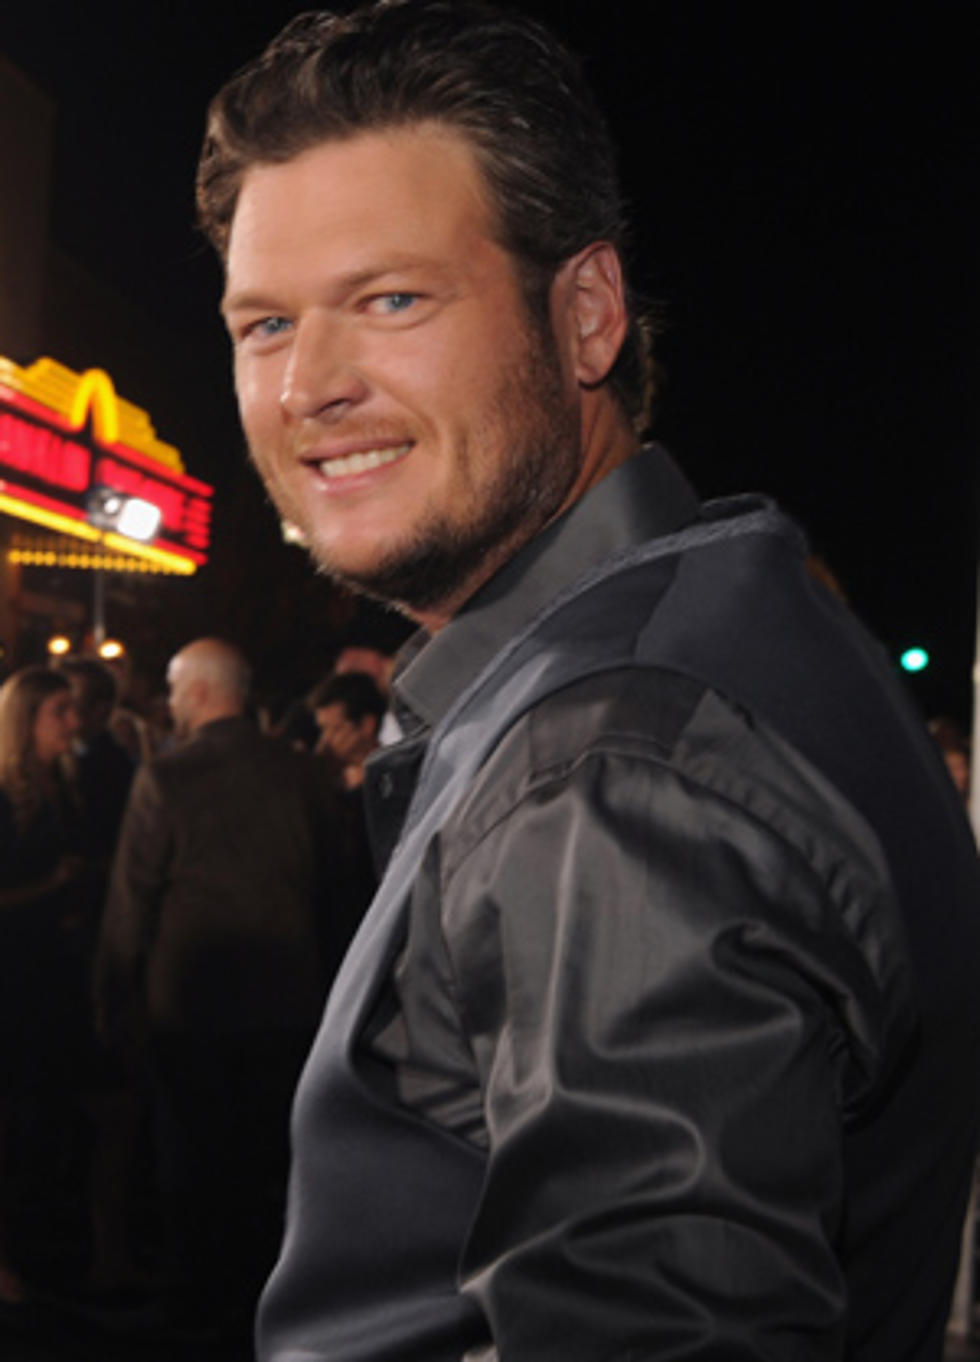 Blake Shelton Tops the Charts With 'God Gave Me You'